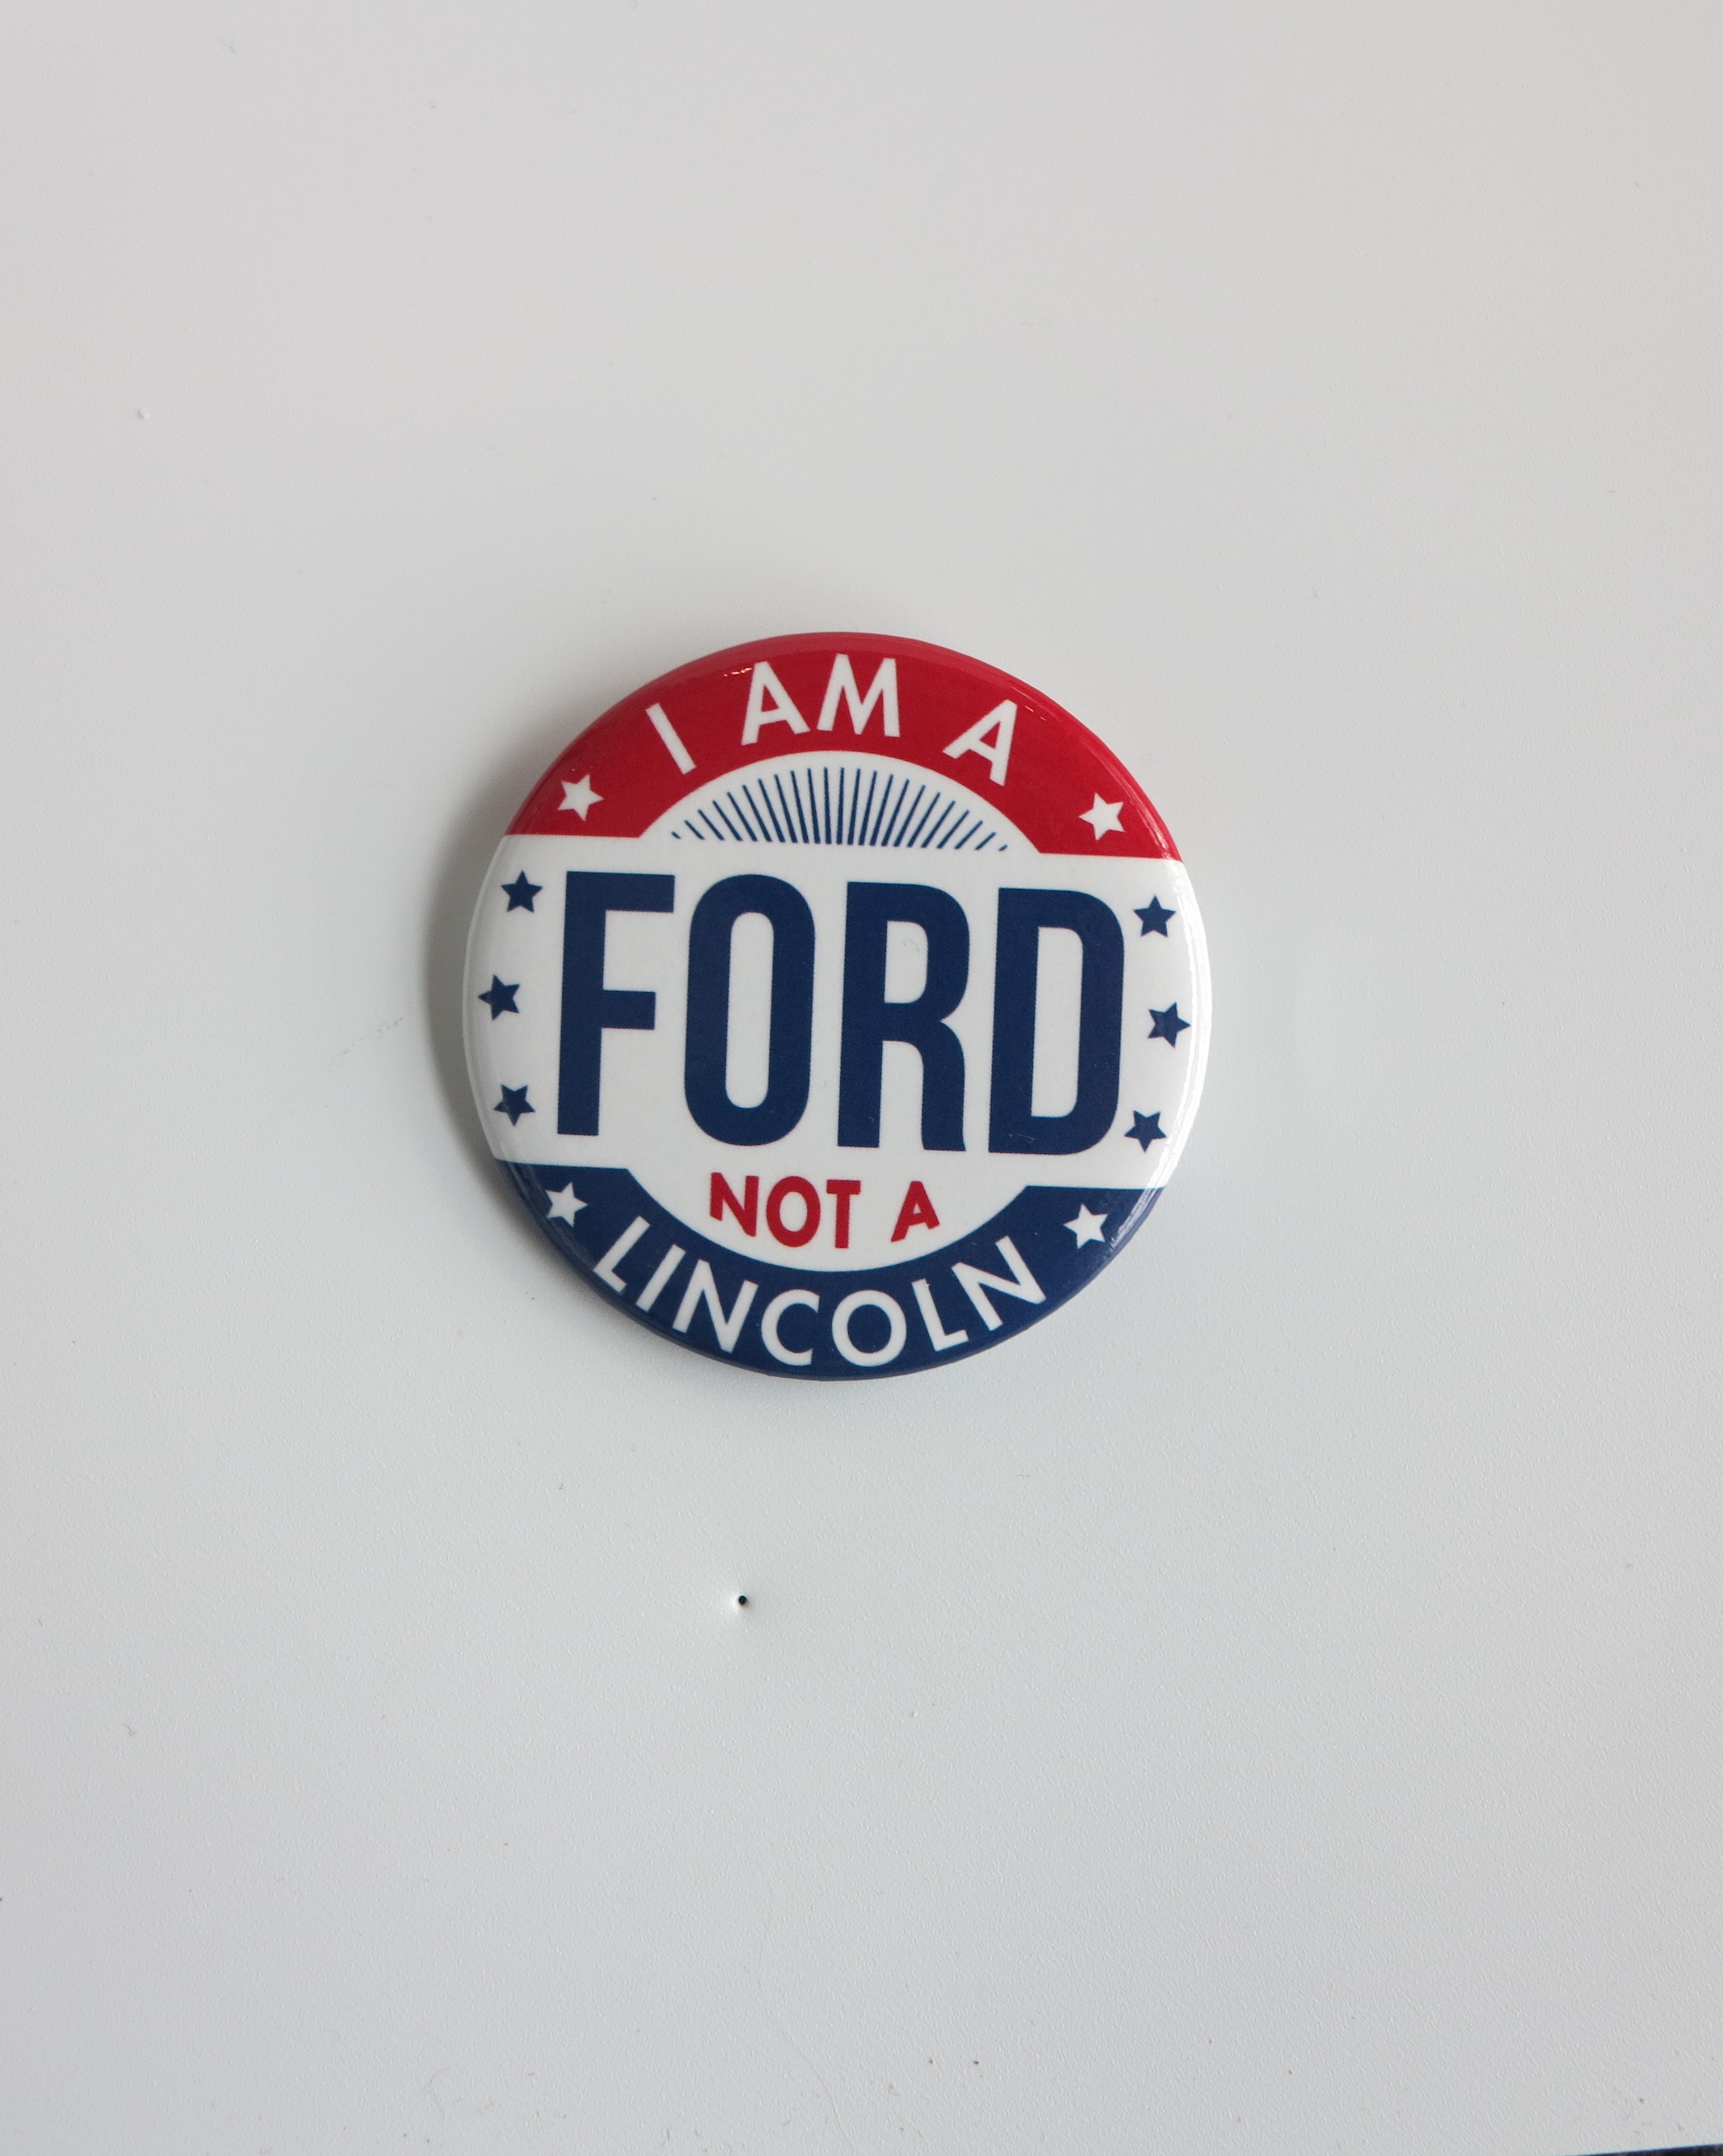 Campaign Button, I Am a Ford!